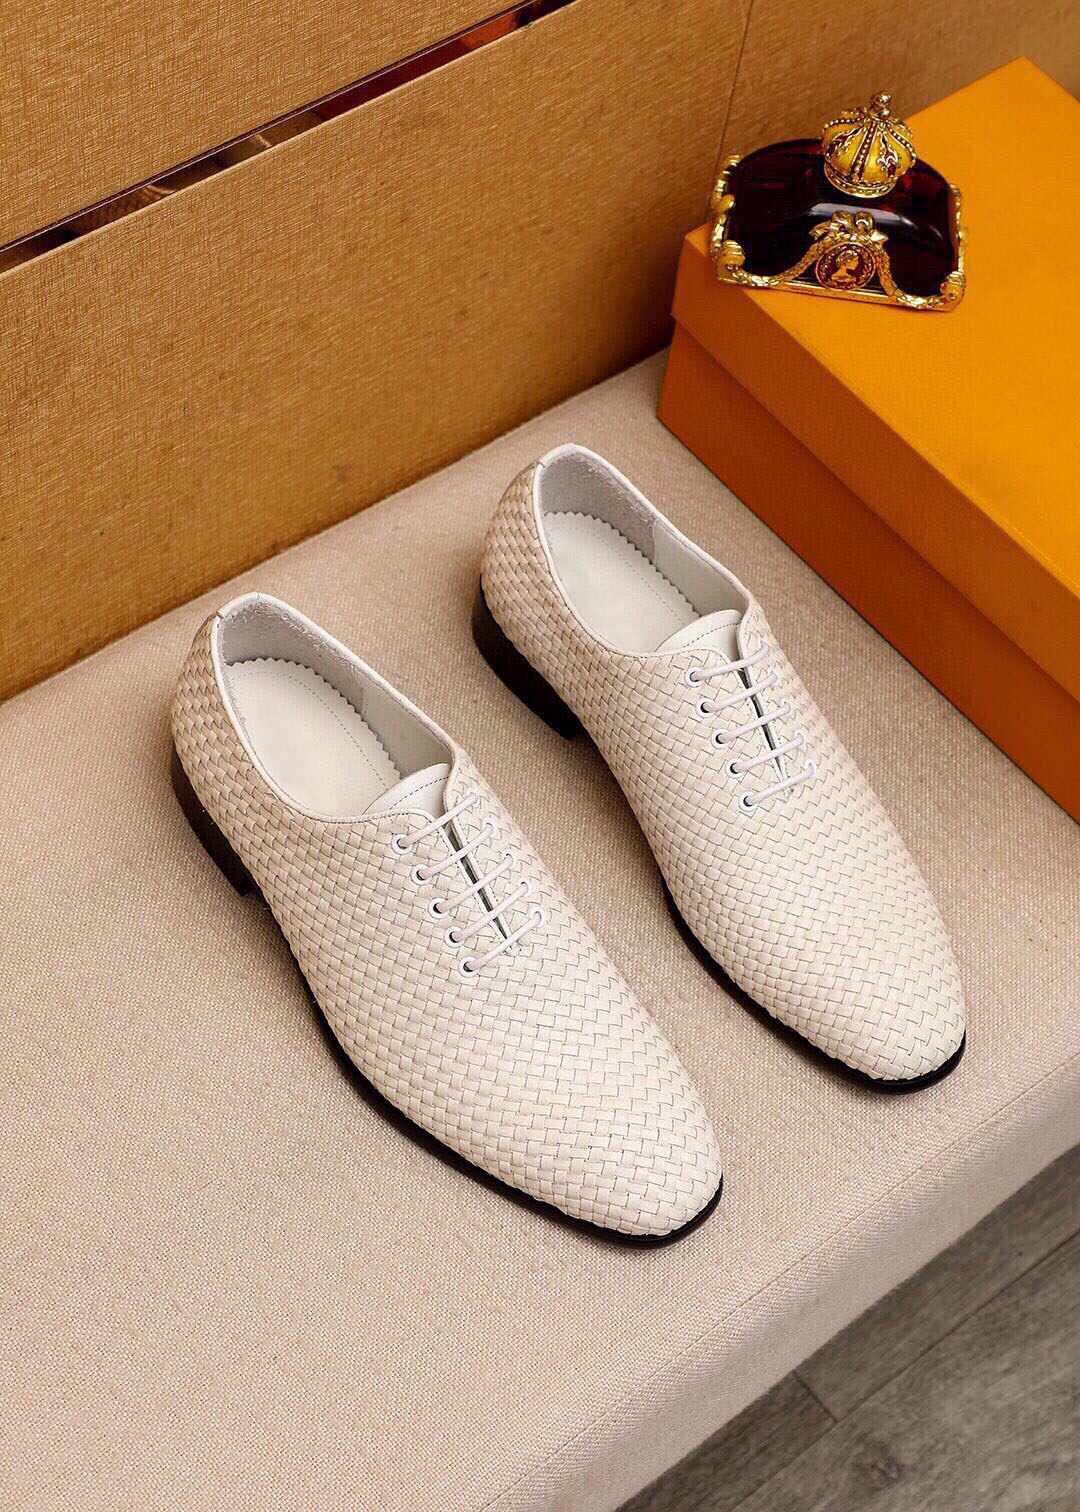 2023 Mens Designer Trade Shoes Fashion Fashion Ceedhine Business Office Work Formal Oxfords Brand Party Wedding Flats размер 38-45